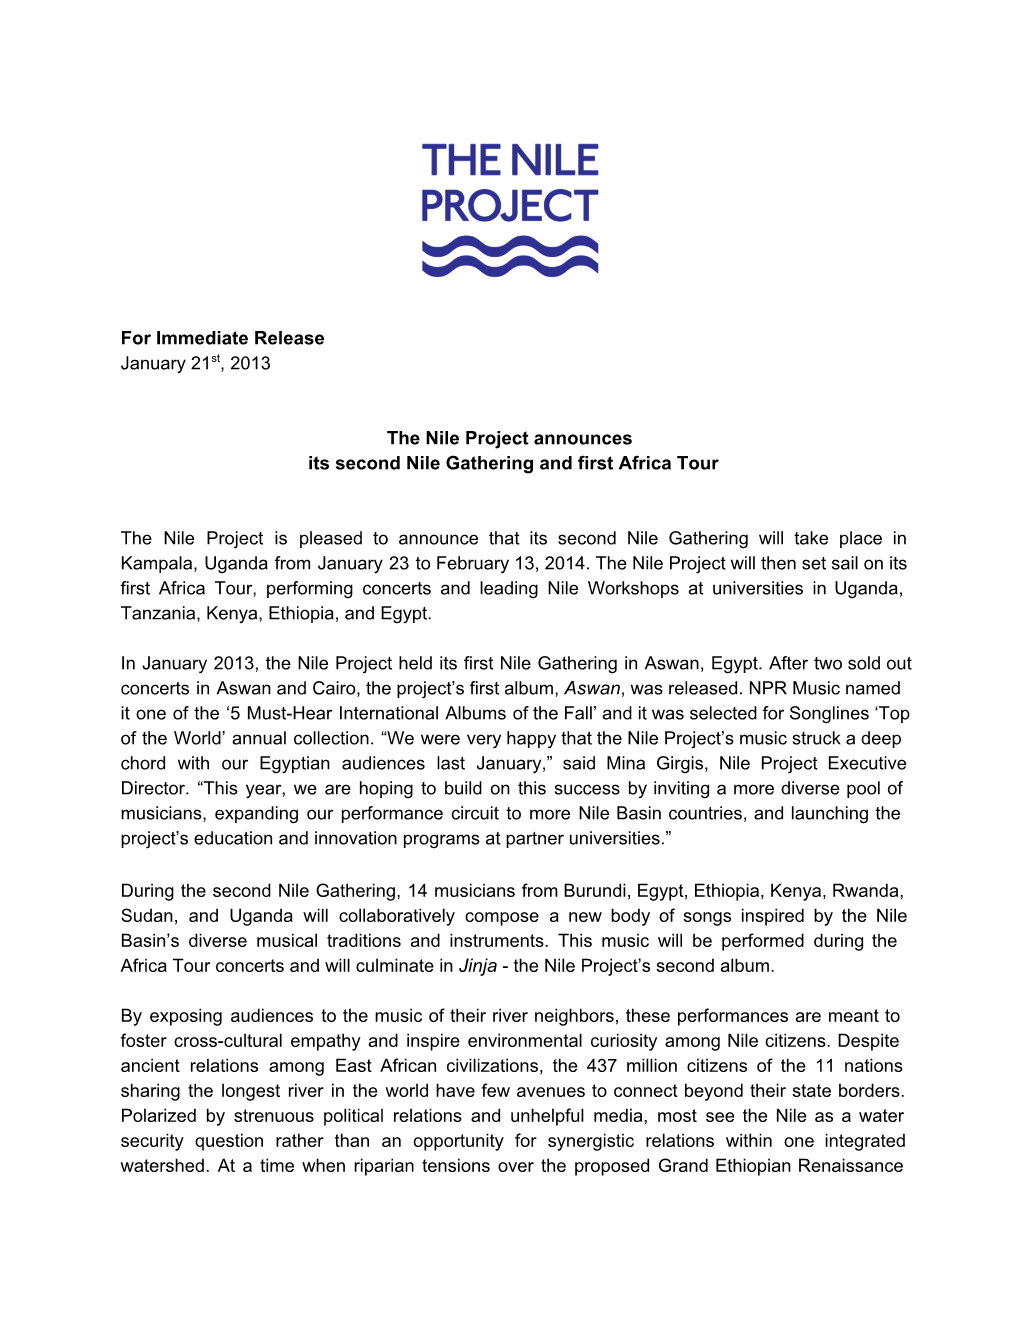 For Immediate Release January 21St, 2013 the Nile Project Announces